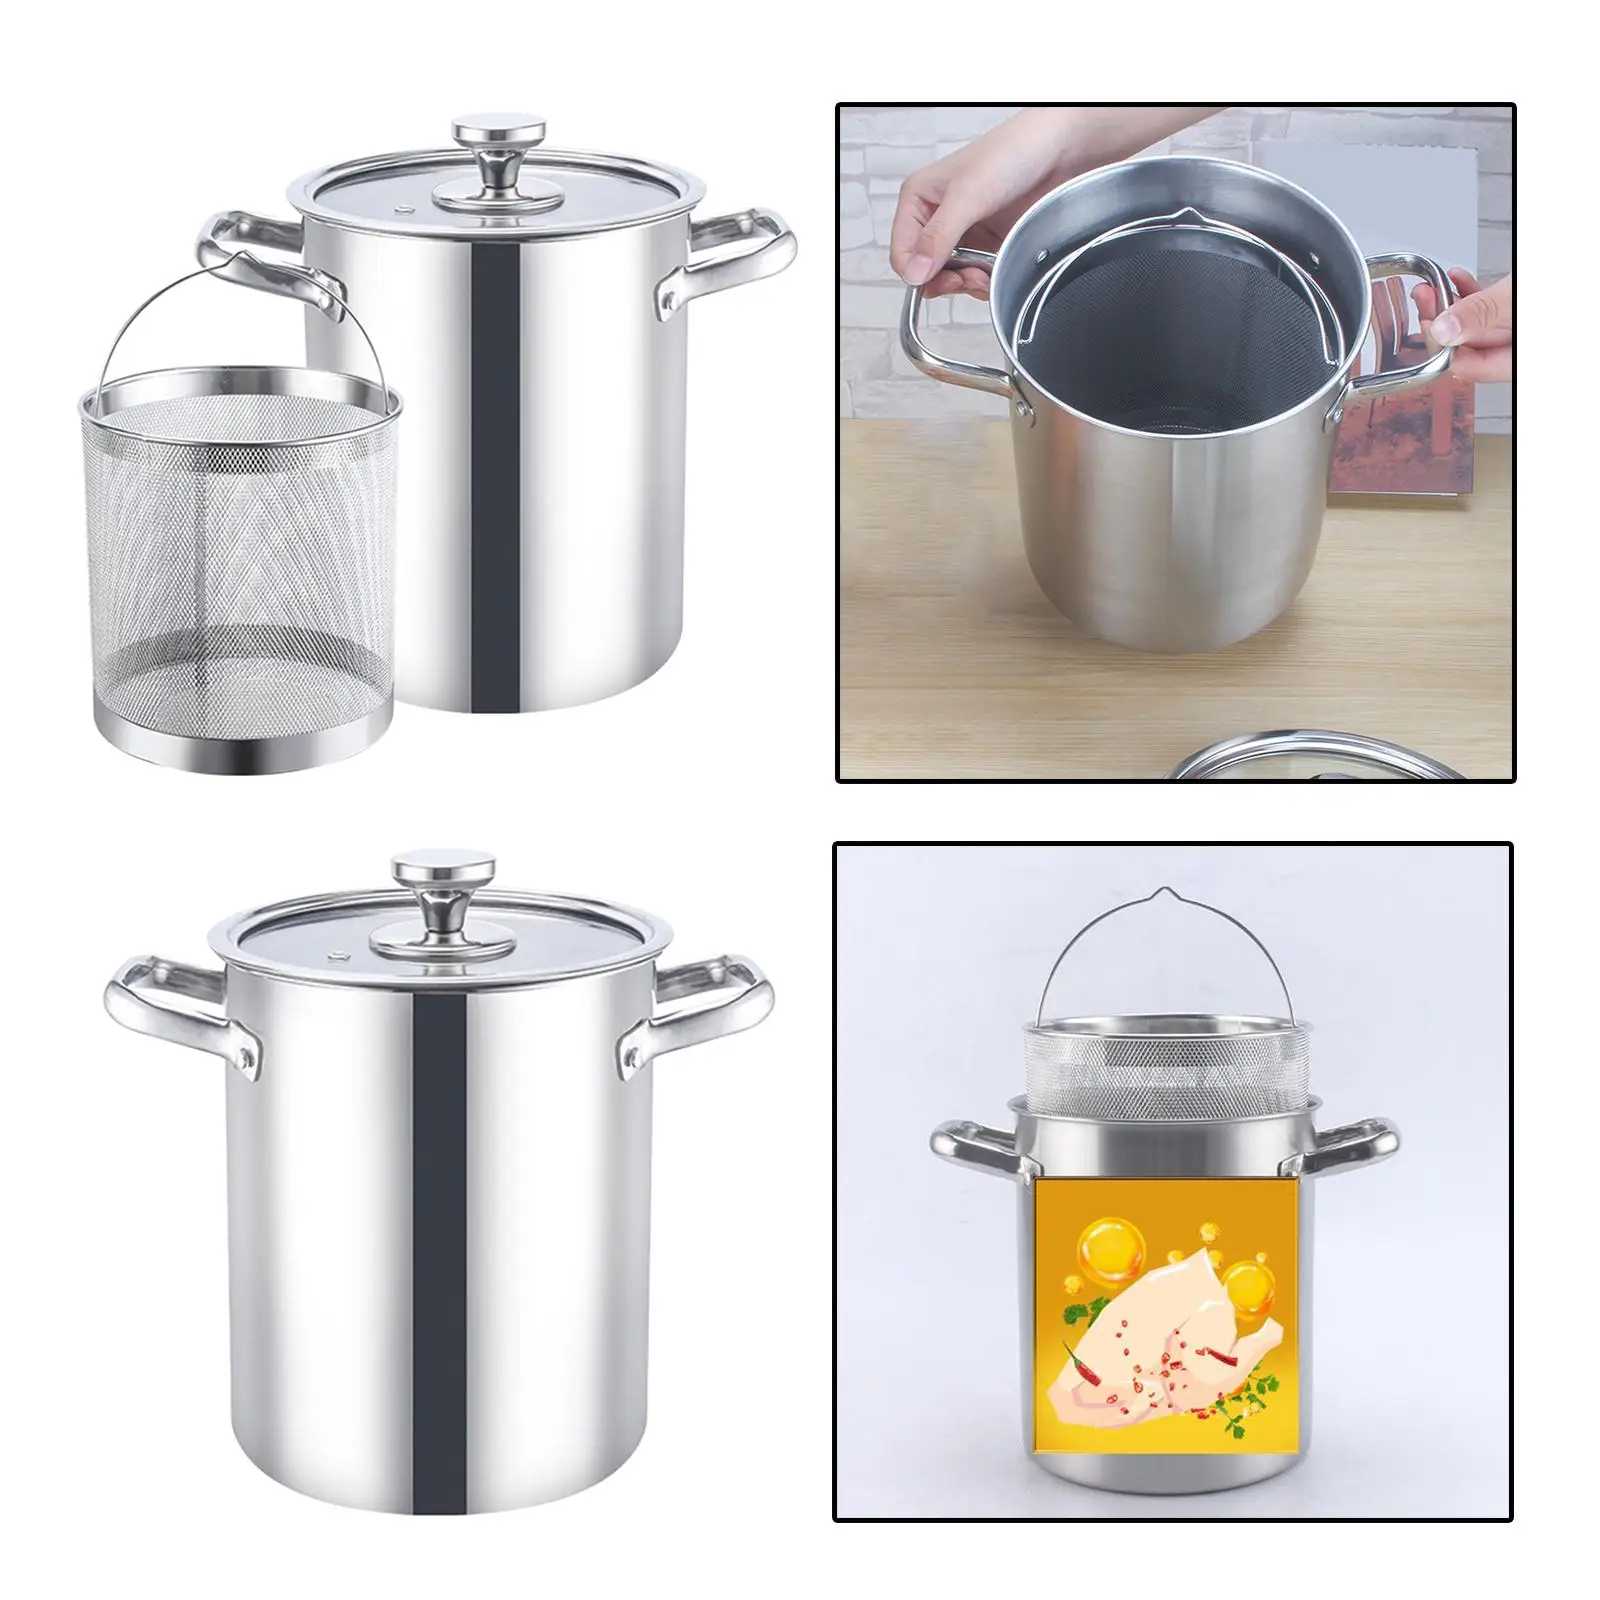 Stockpot Heavy Duty for Steaming, Frying and Boiling Large Capacity with Lid